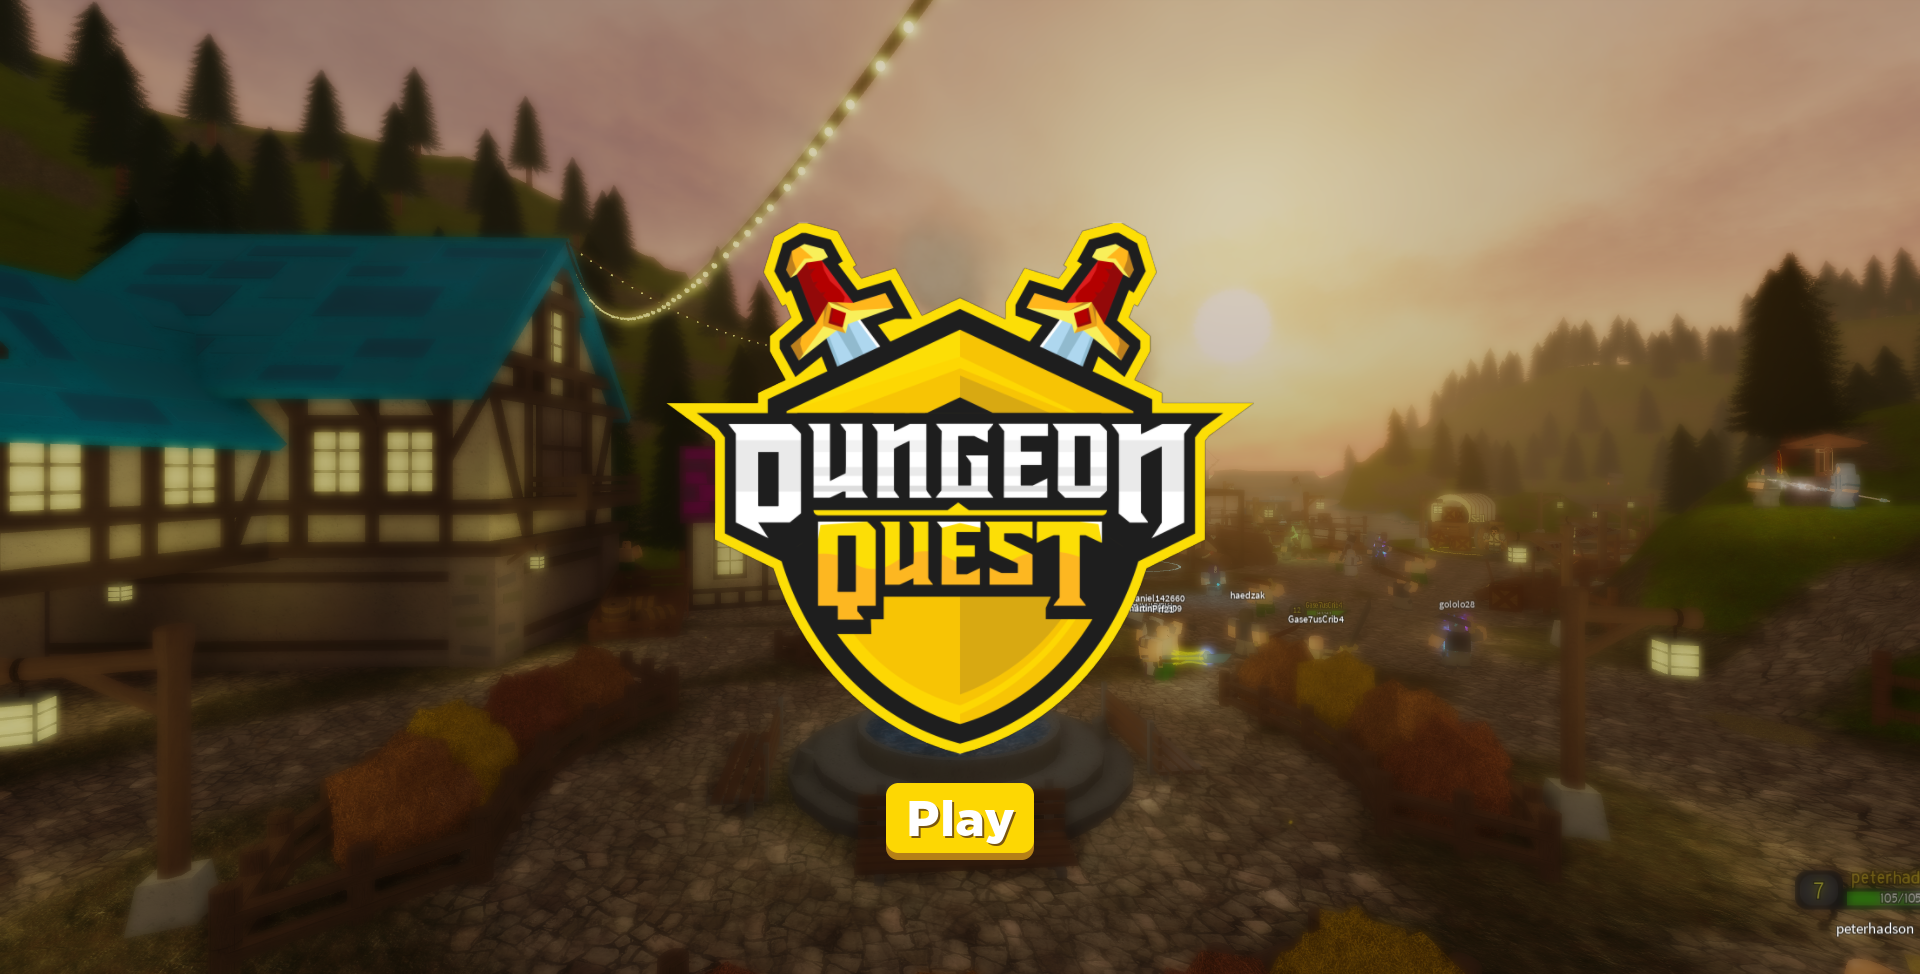 Dungeon Quest Tacticalfasr - roblox dungeon quest tips and tricks